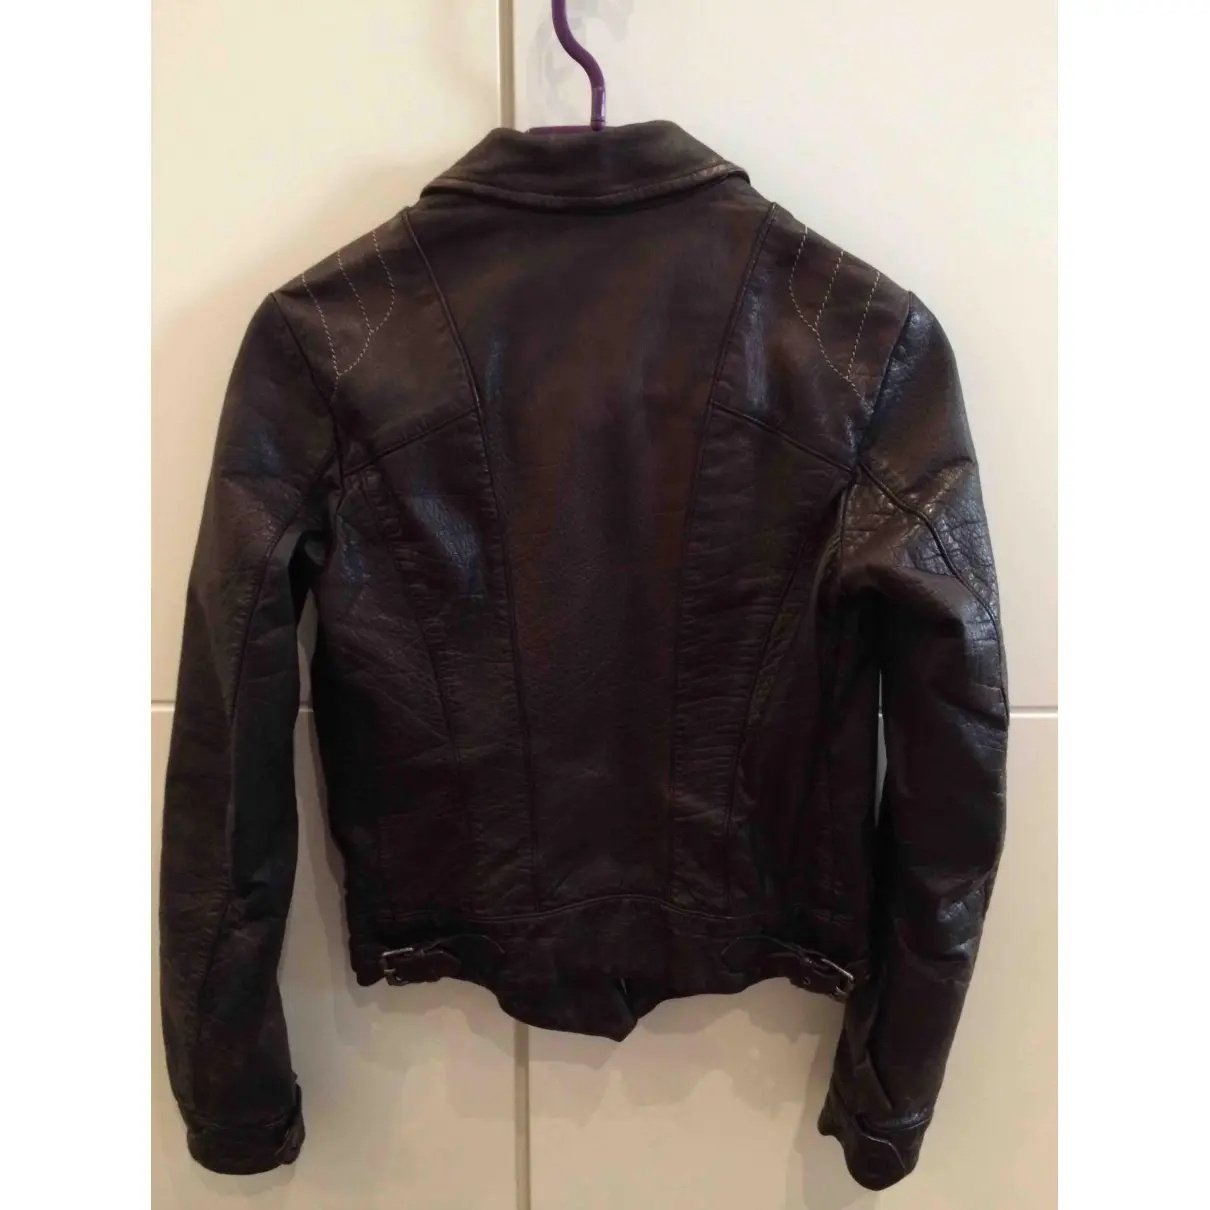 Buy GUESS Leather jacket online